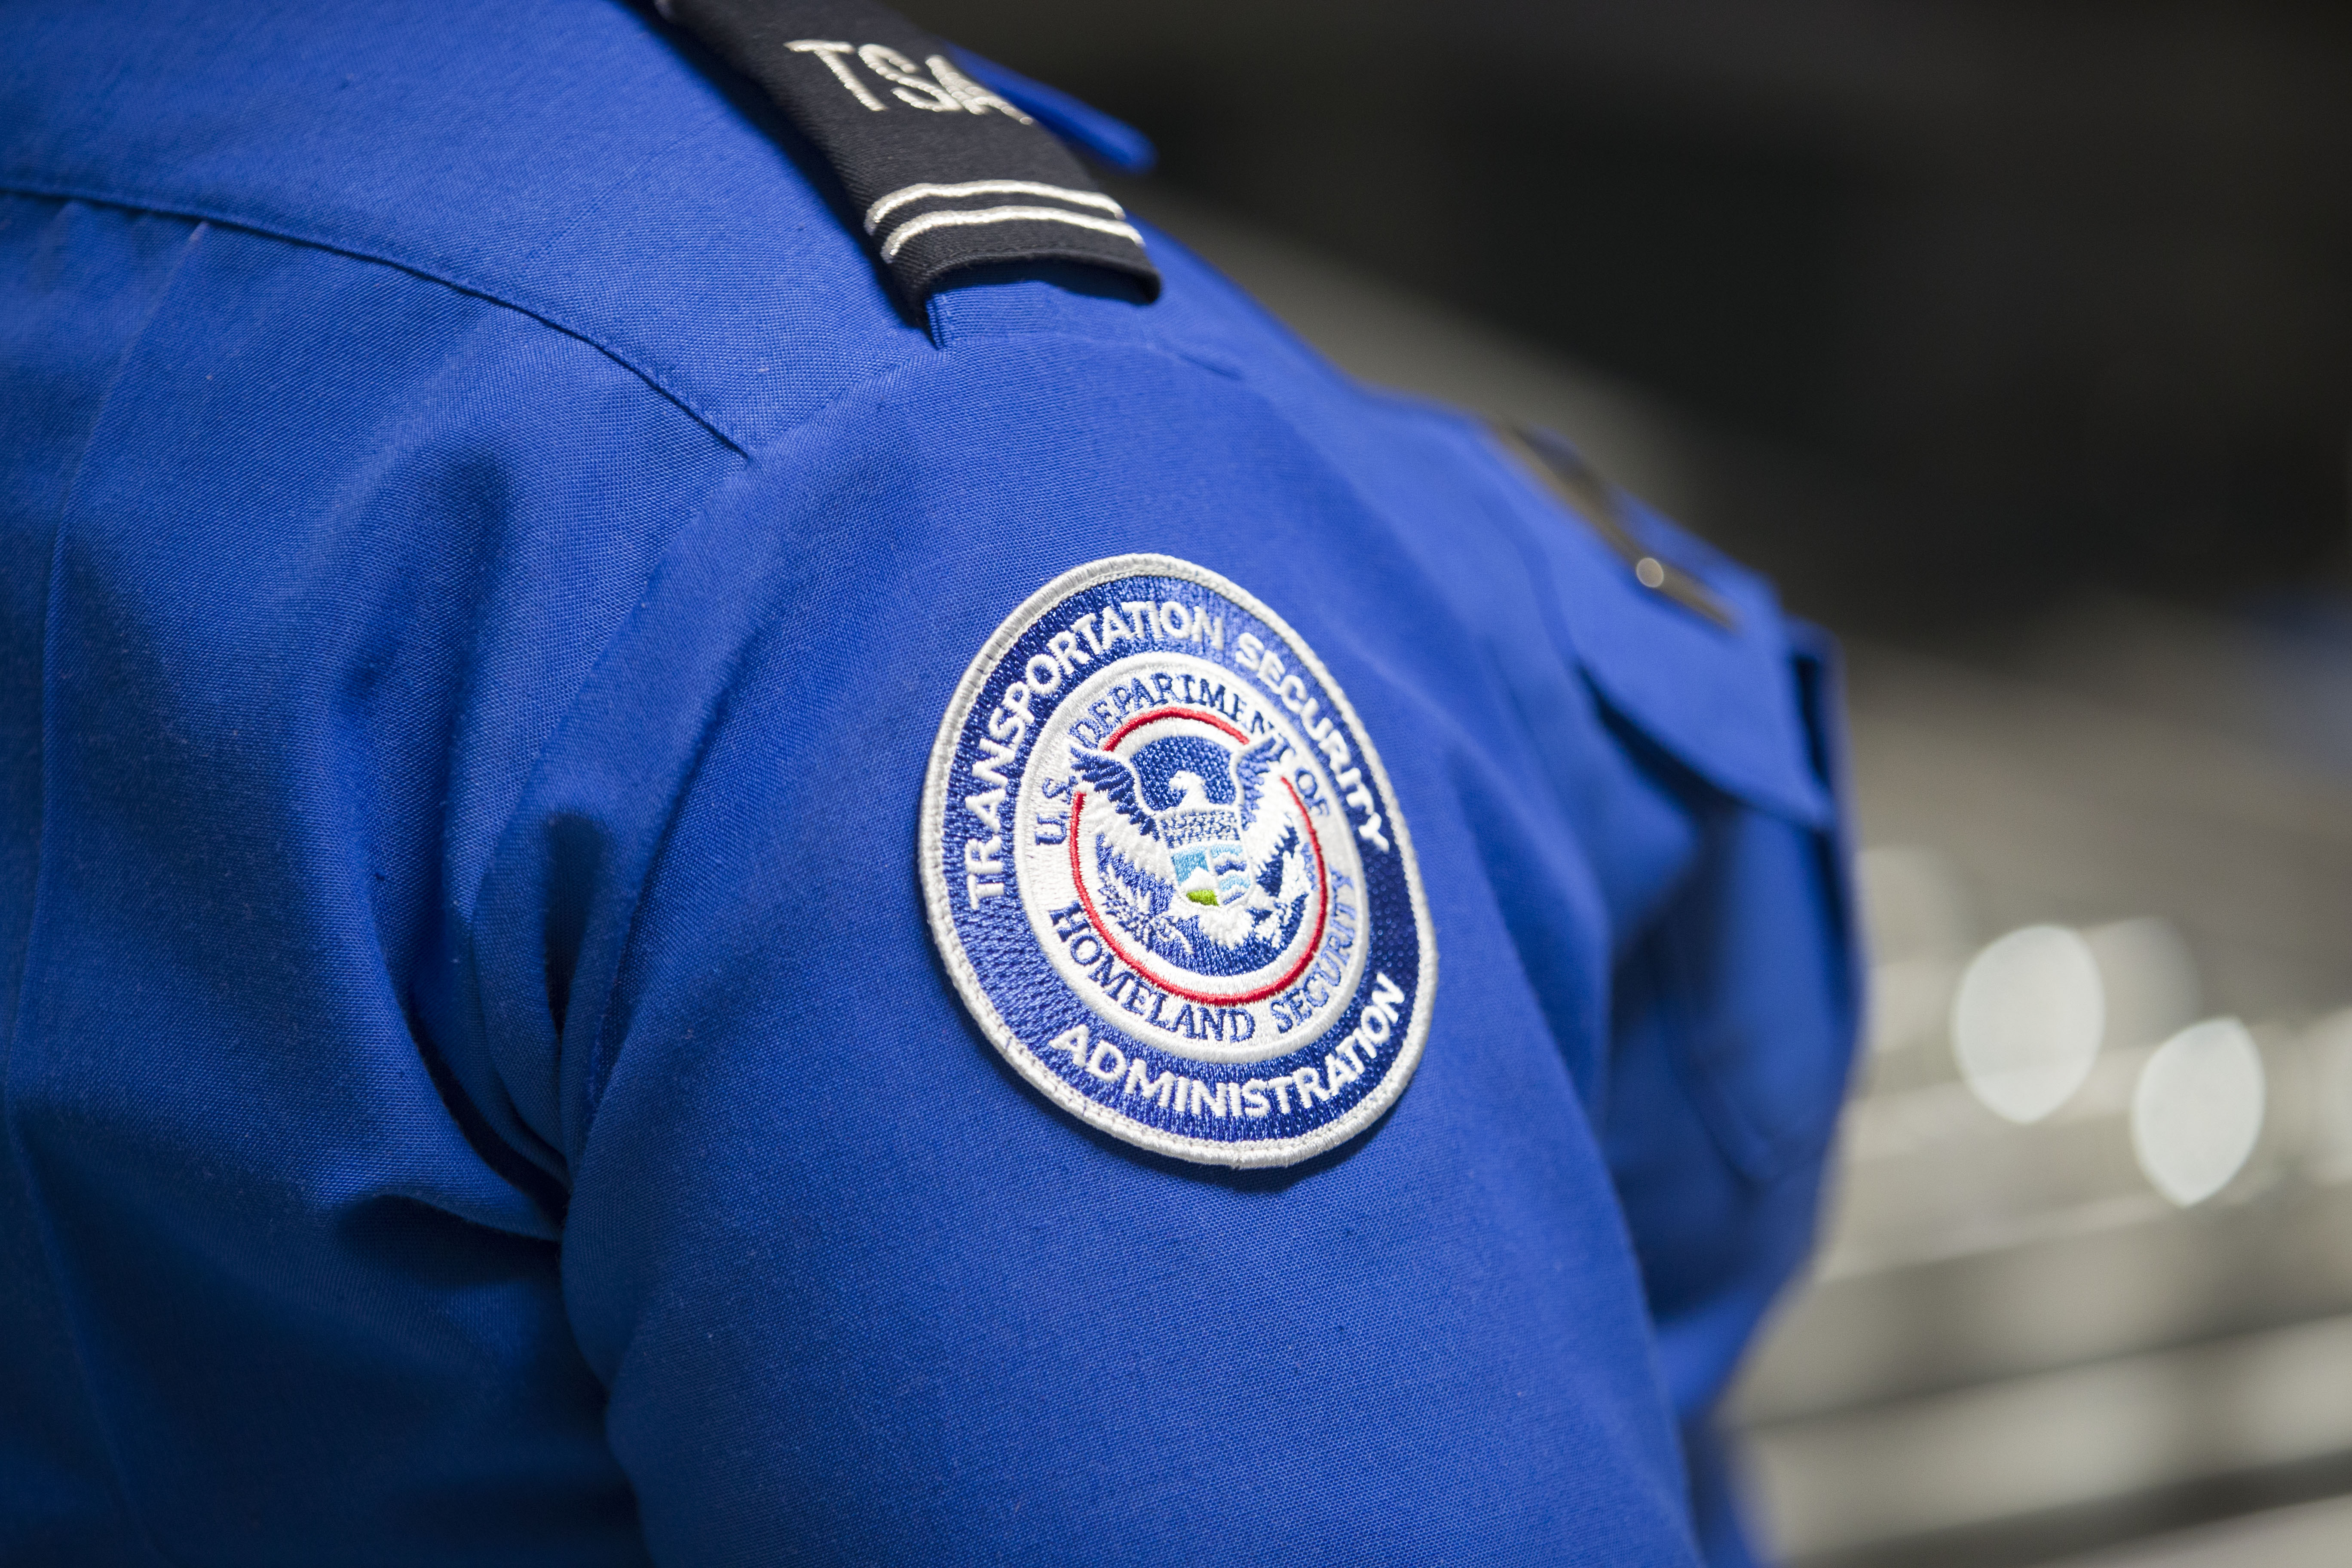 A Transportation Security Administration agent is pictured at Florida's Miami International Airport on May 21, 2019.